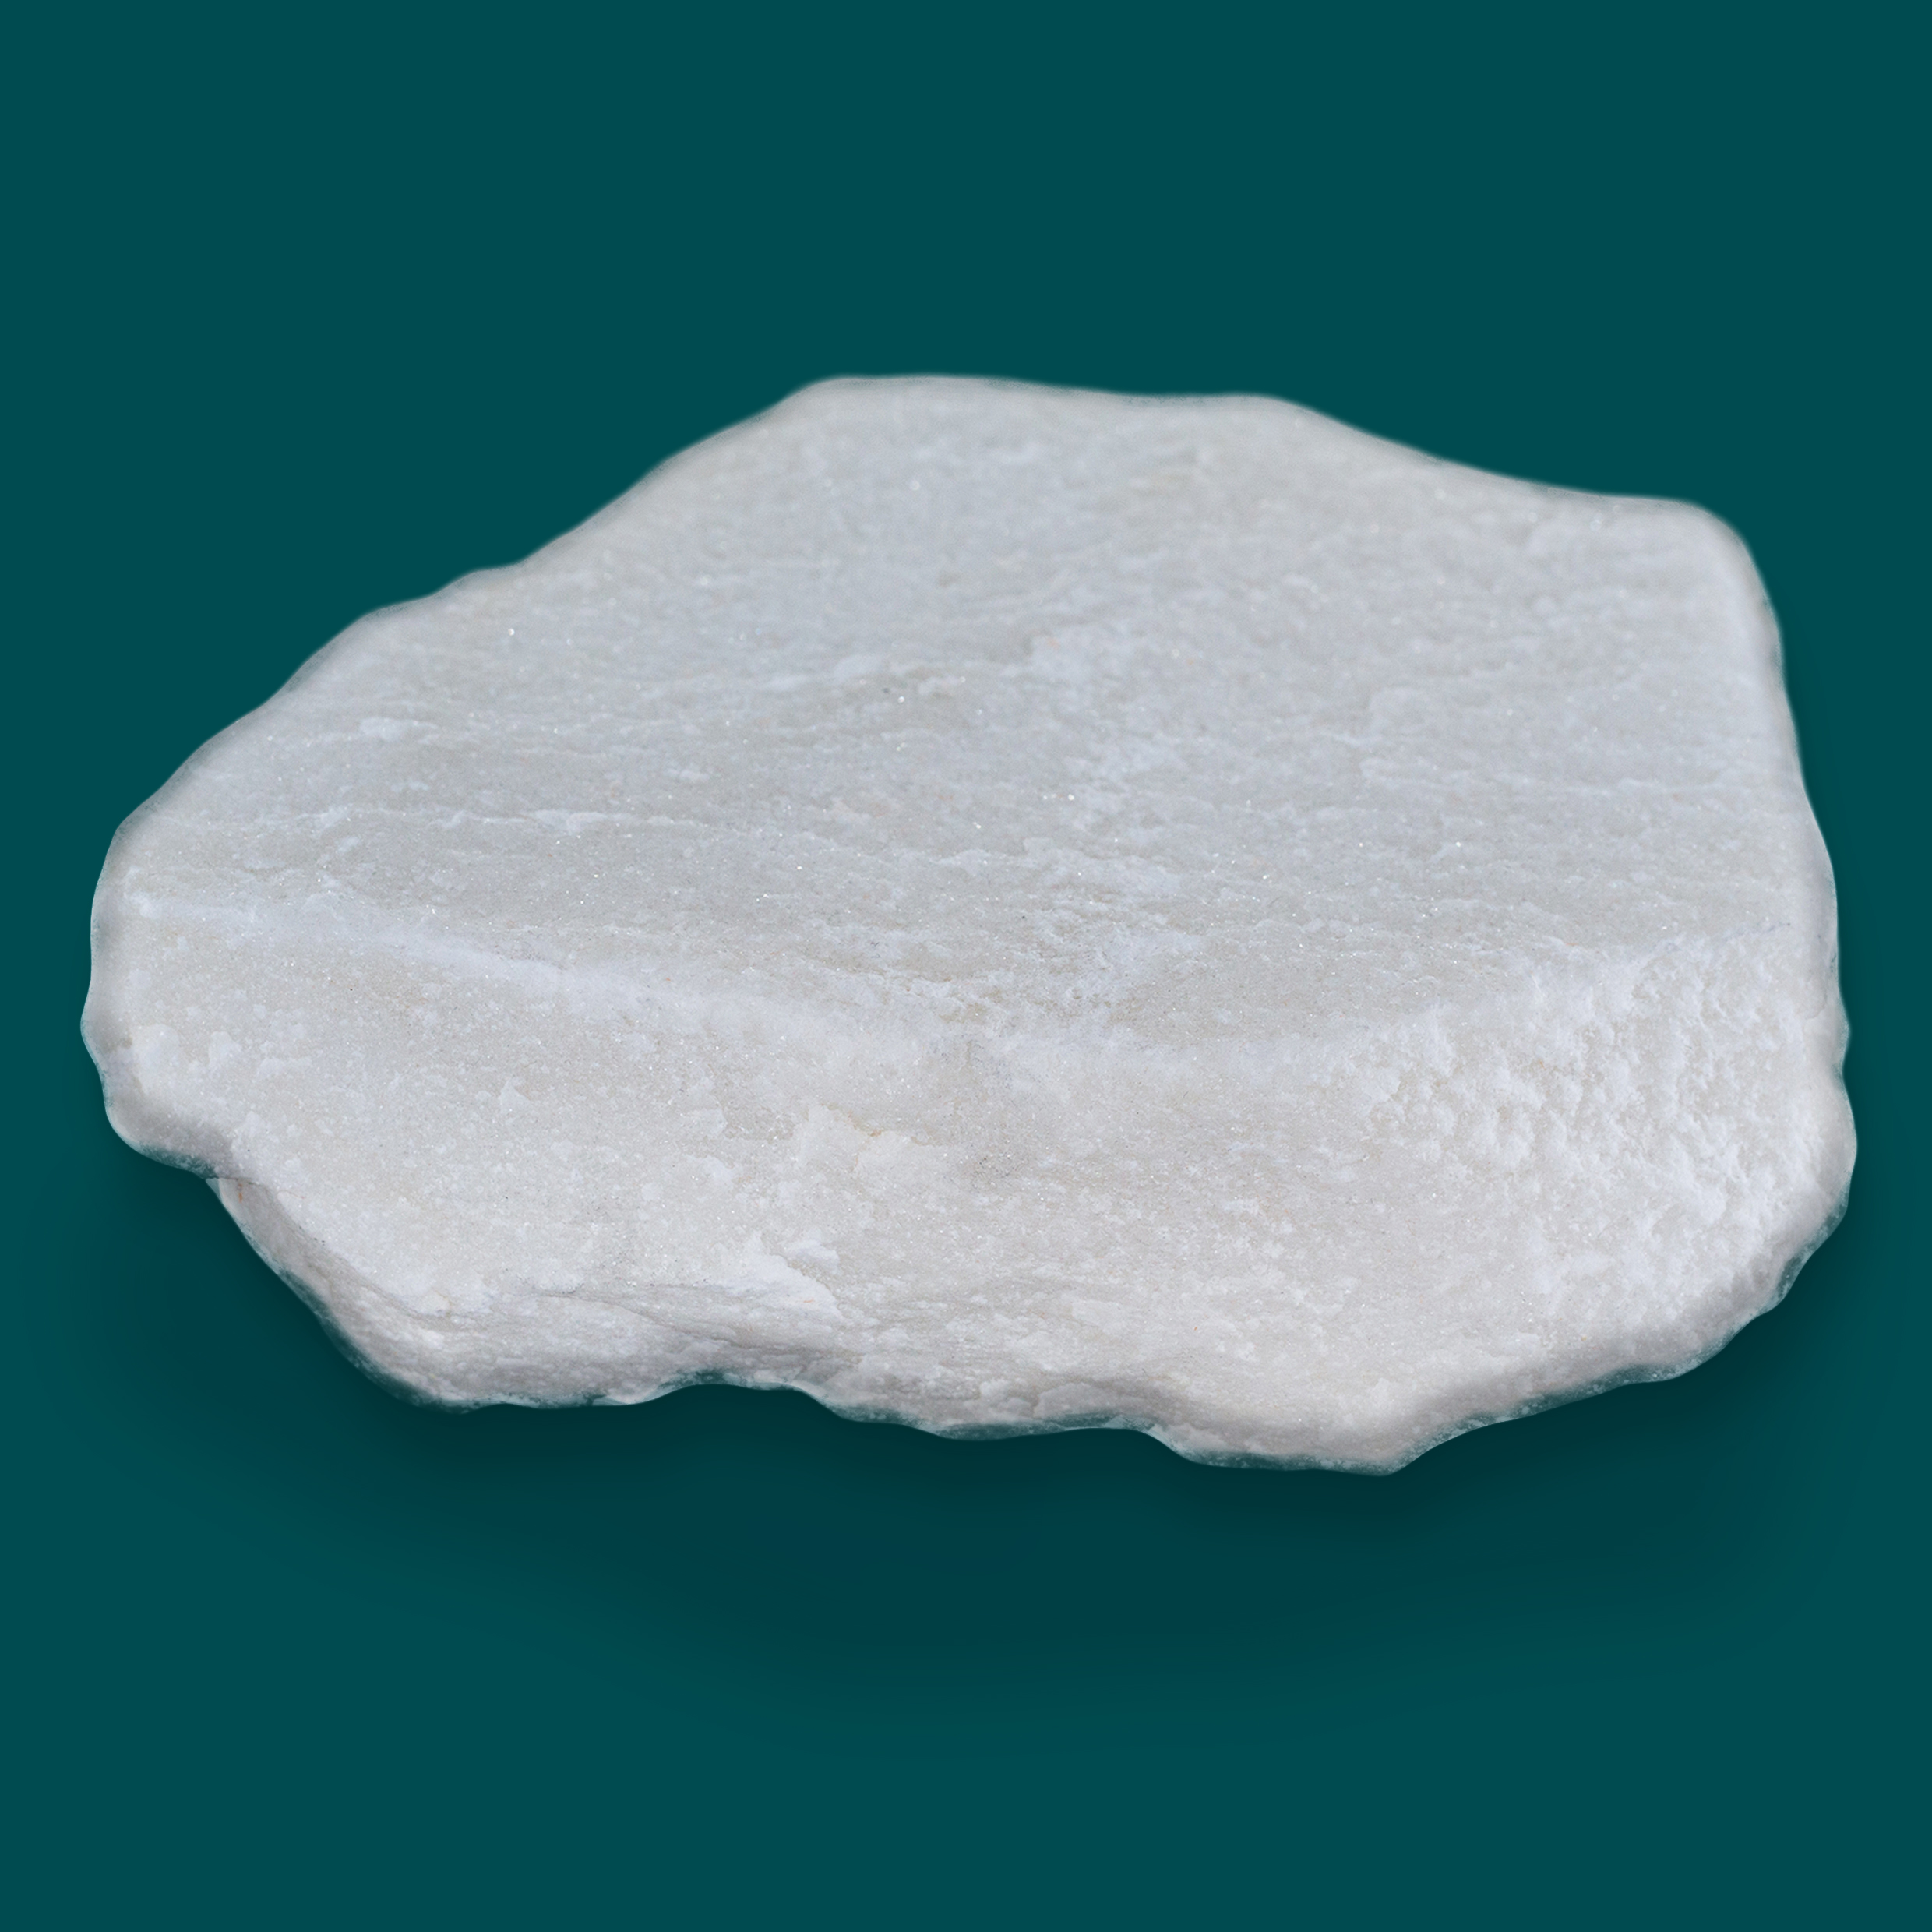 Calcium Carbonate Market Report 2021-26, Size, Share, Growth, Trends and Forecast